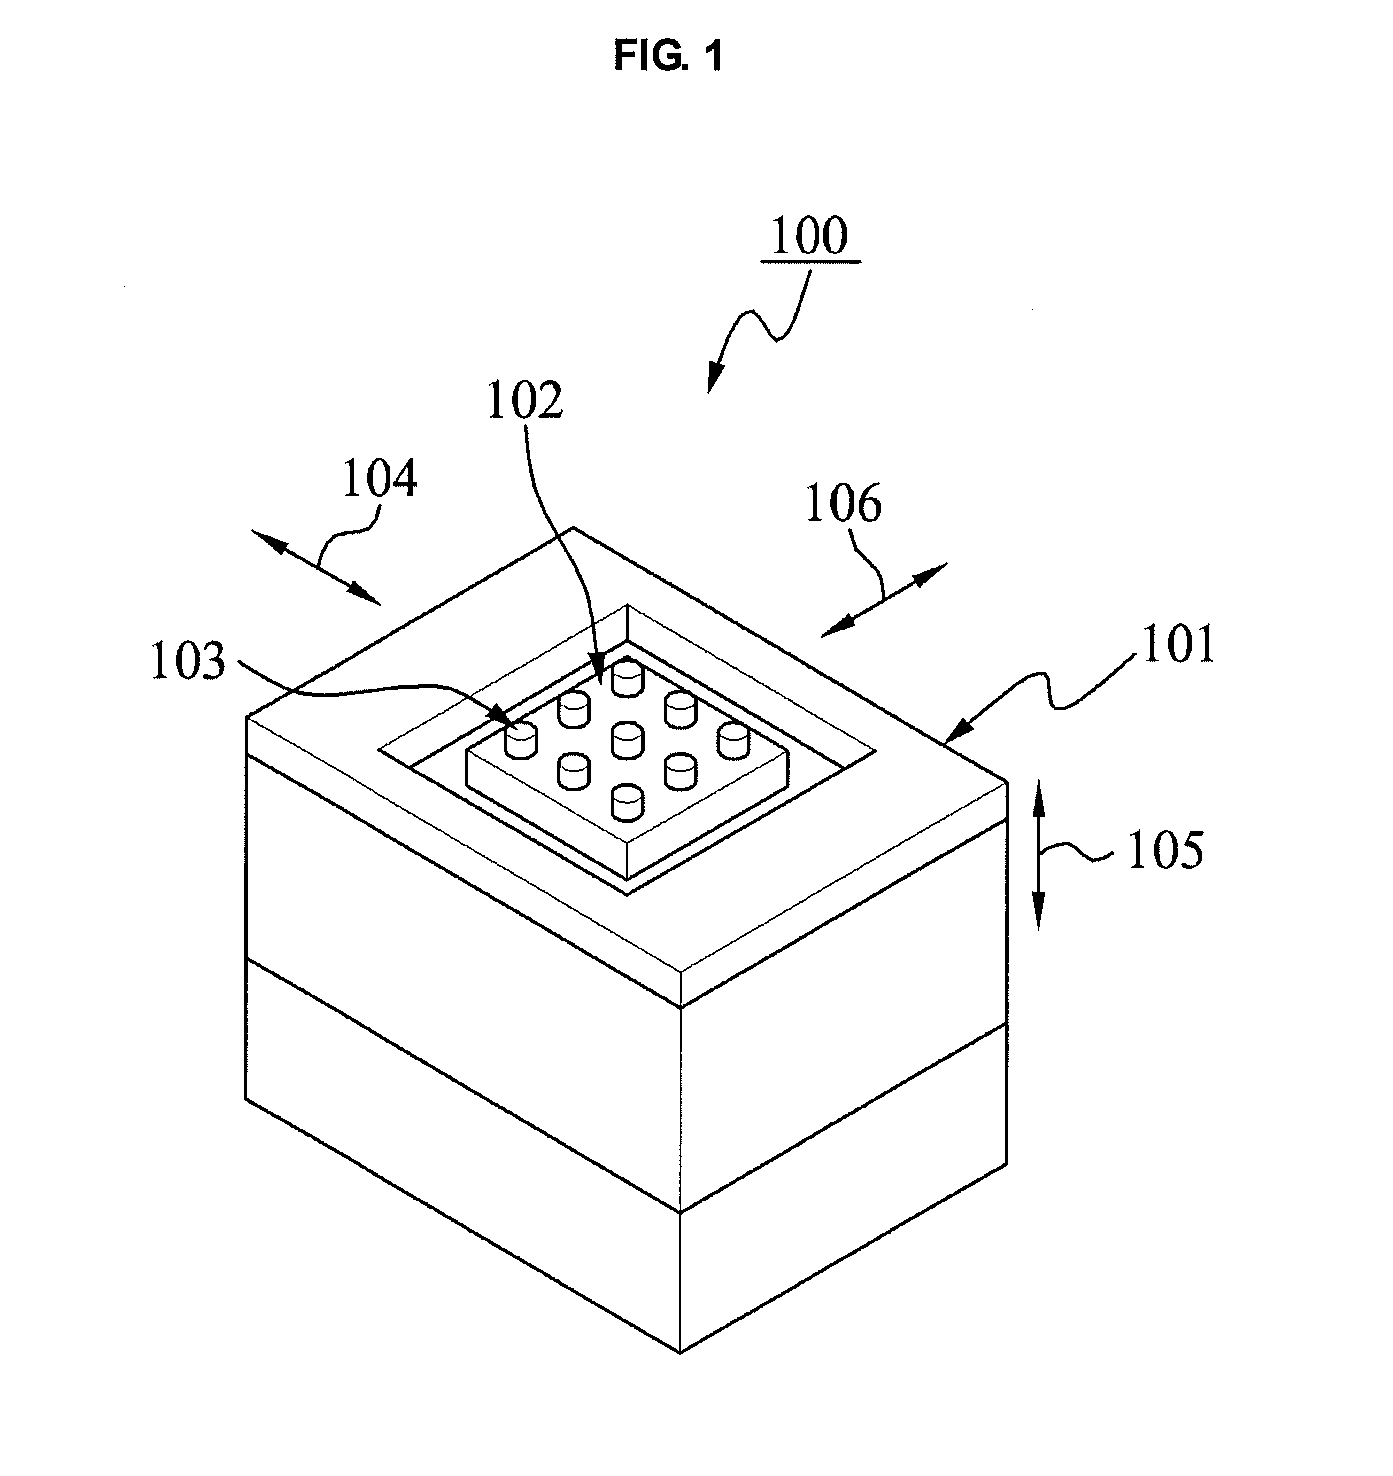 Apparatus and method for 3 degree of freedom (3DOF) tactile feedback